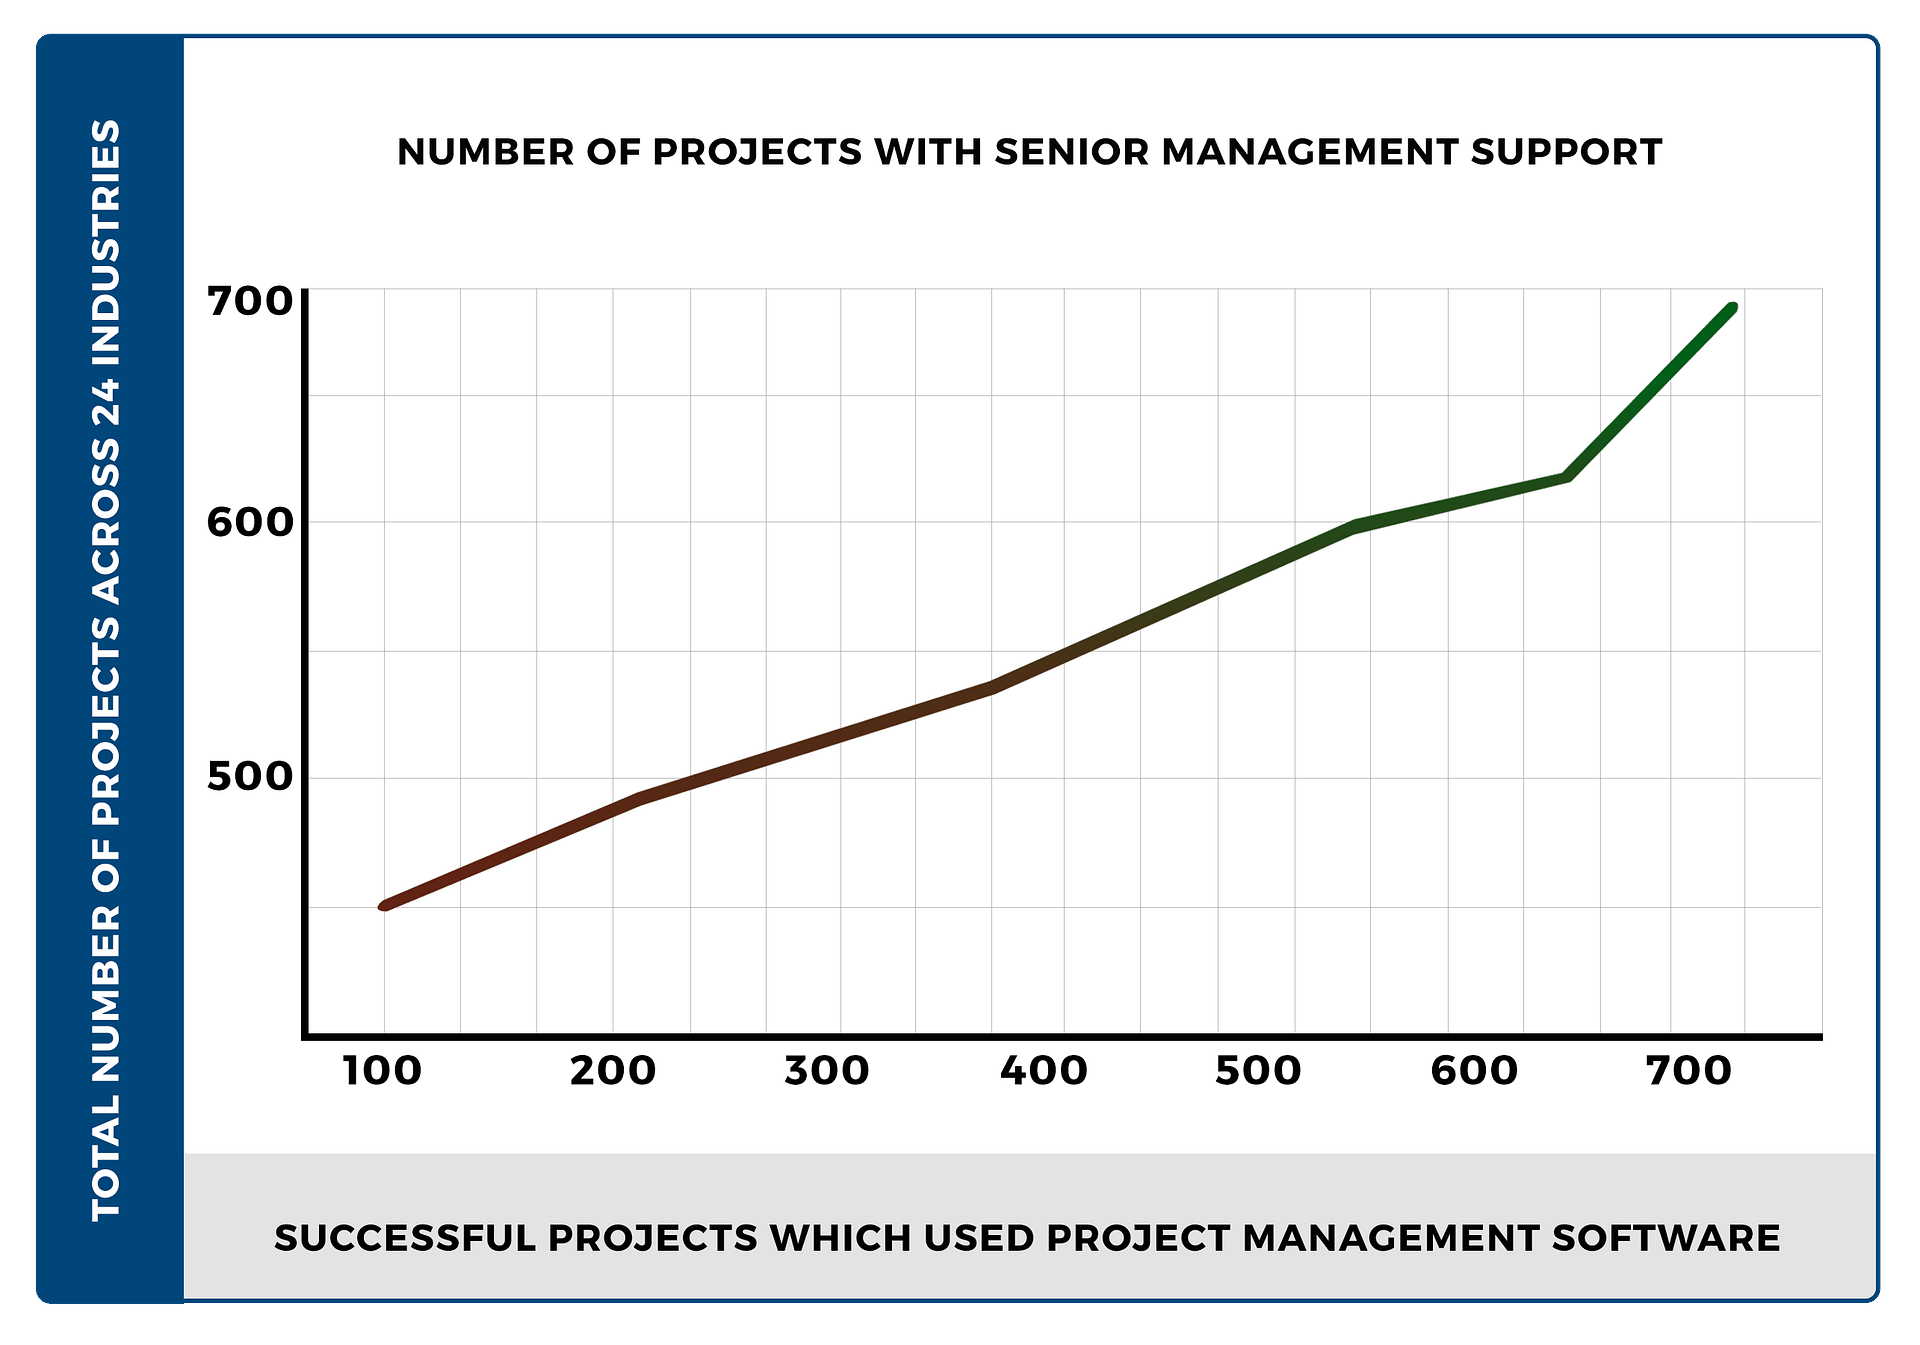 Top Management Support Correlation with Project Management Success